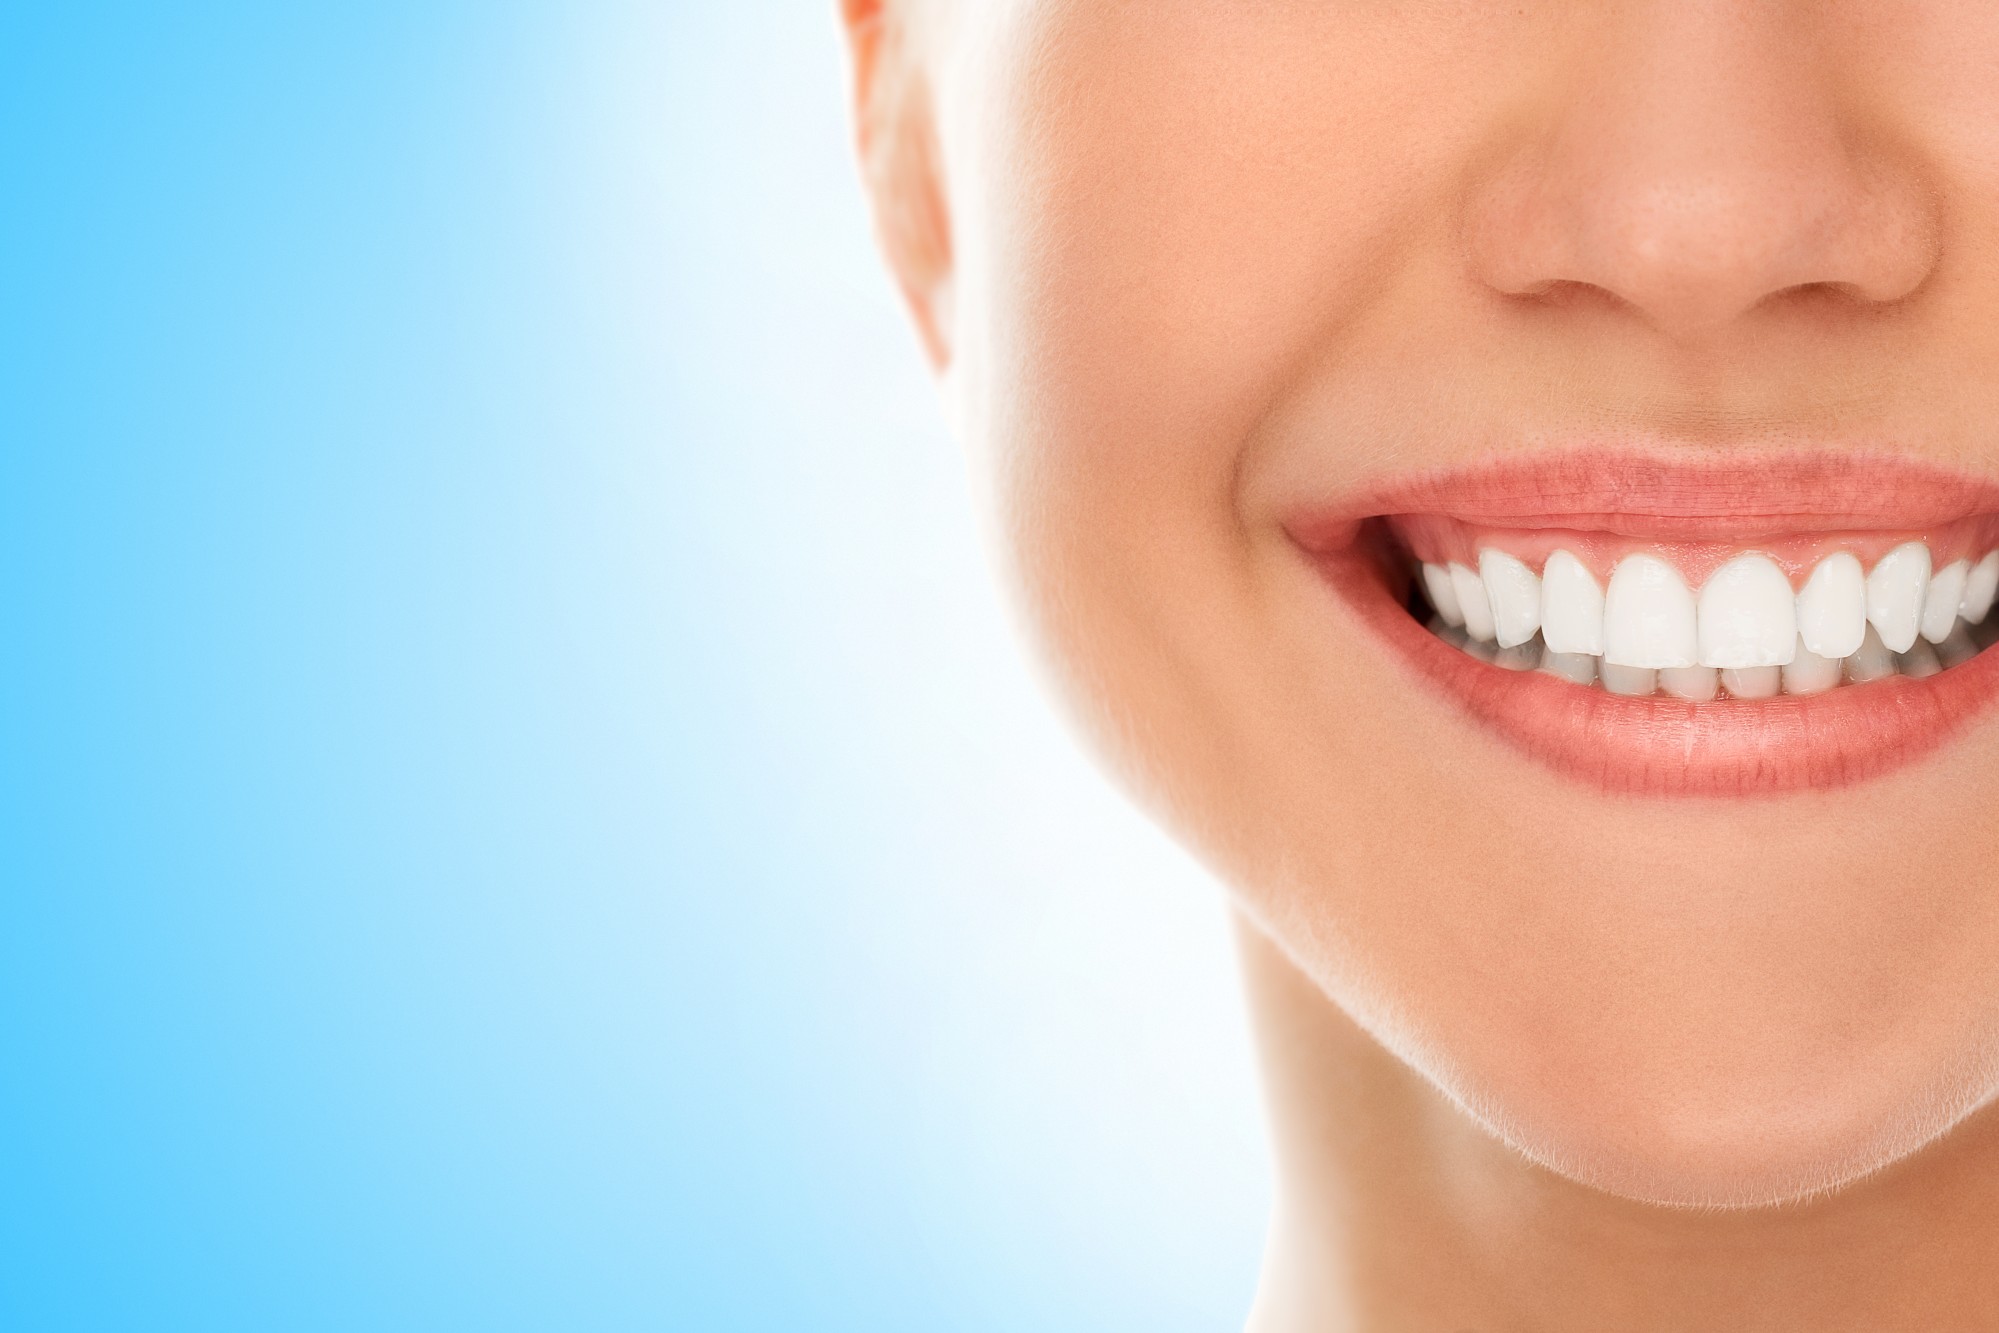 A Cosmetic Dentist Can Affordably Repair Your Smile